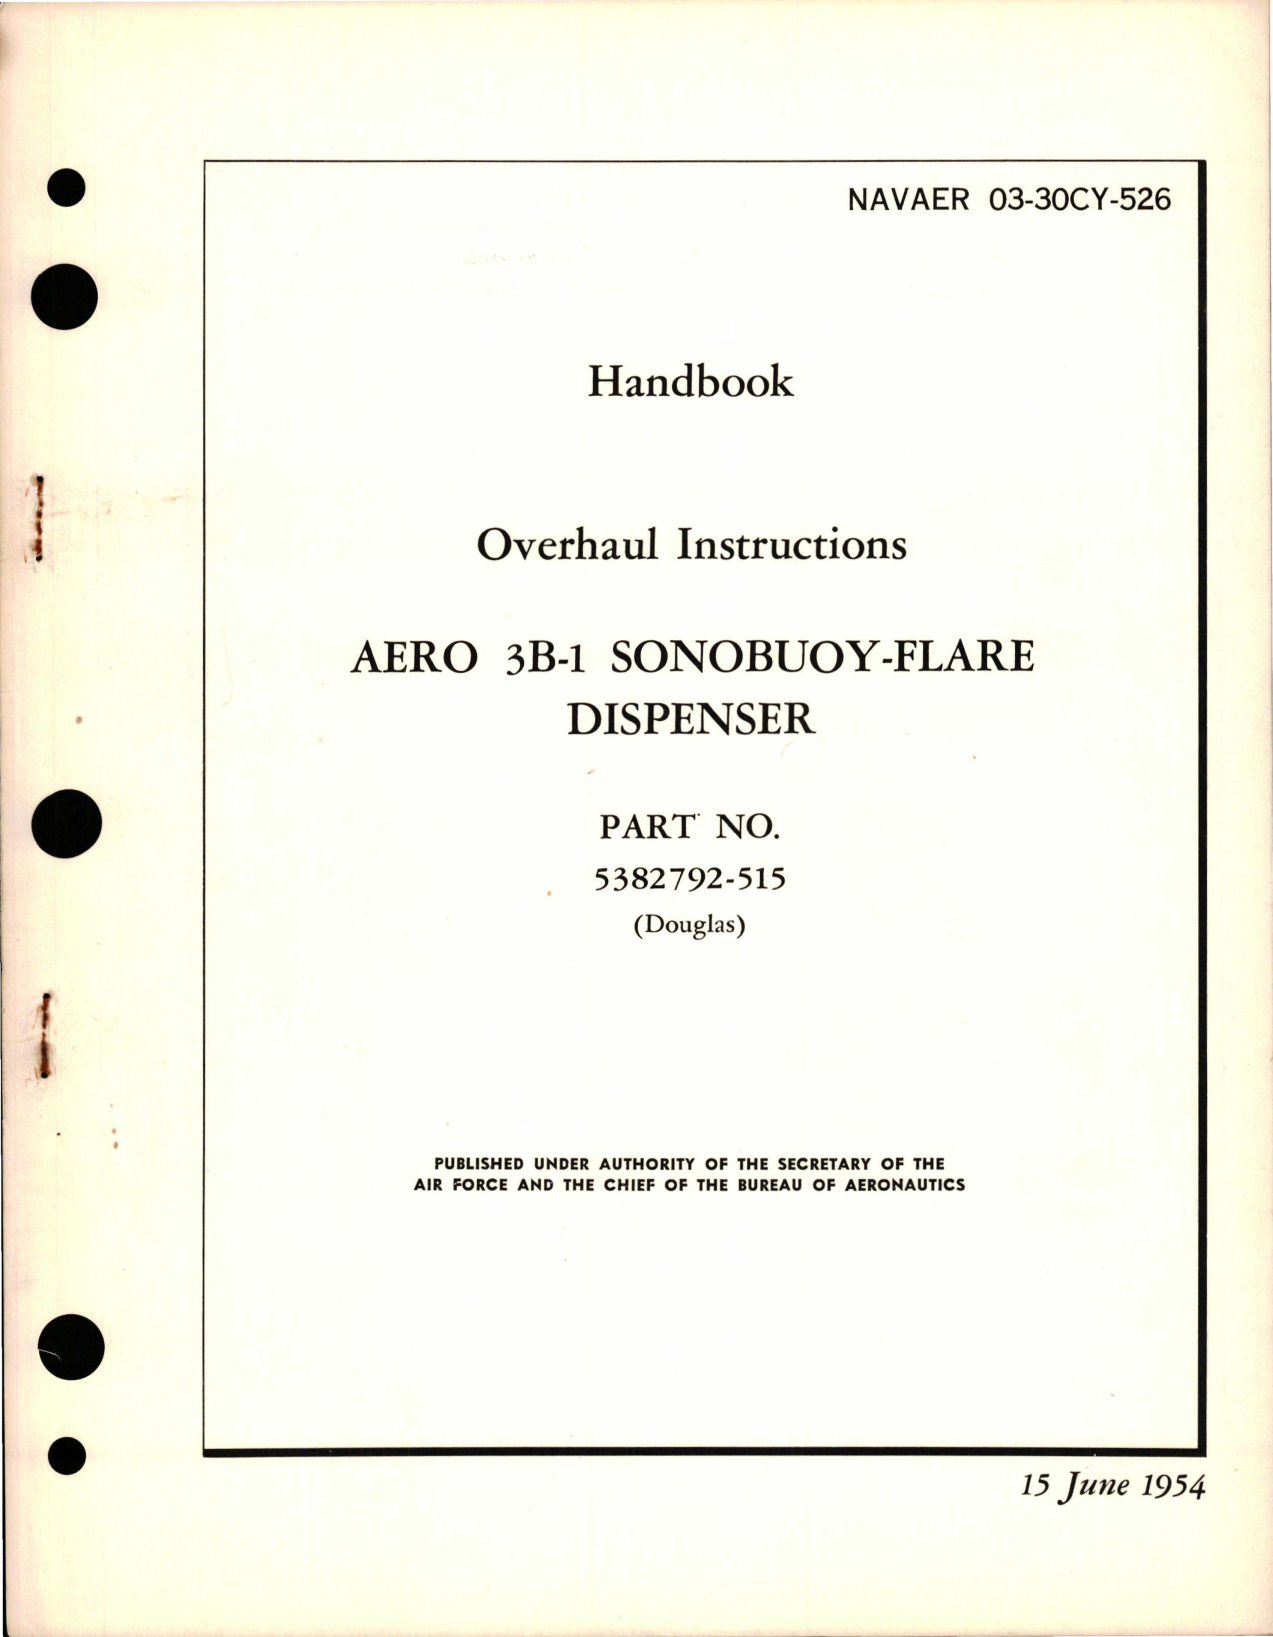 Sample page 1 from AirCorps Library document: Overhaul Instructions for AERO 3B-1 Sonobuoy-Flare Dispenser - Part 5382792-515